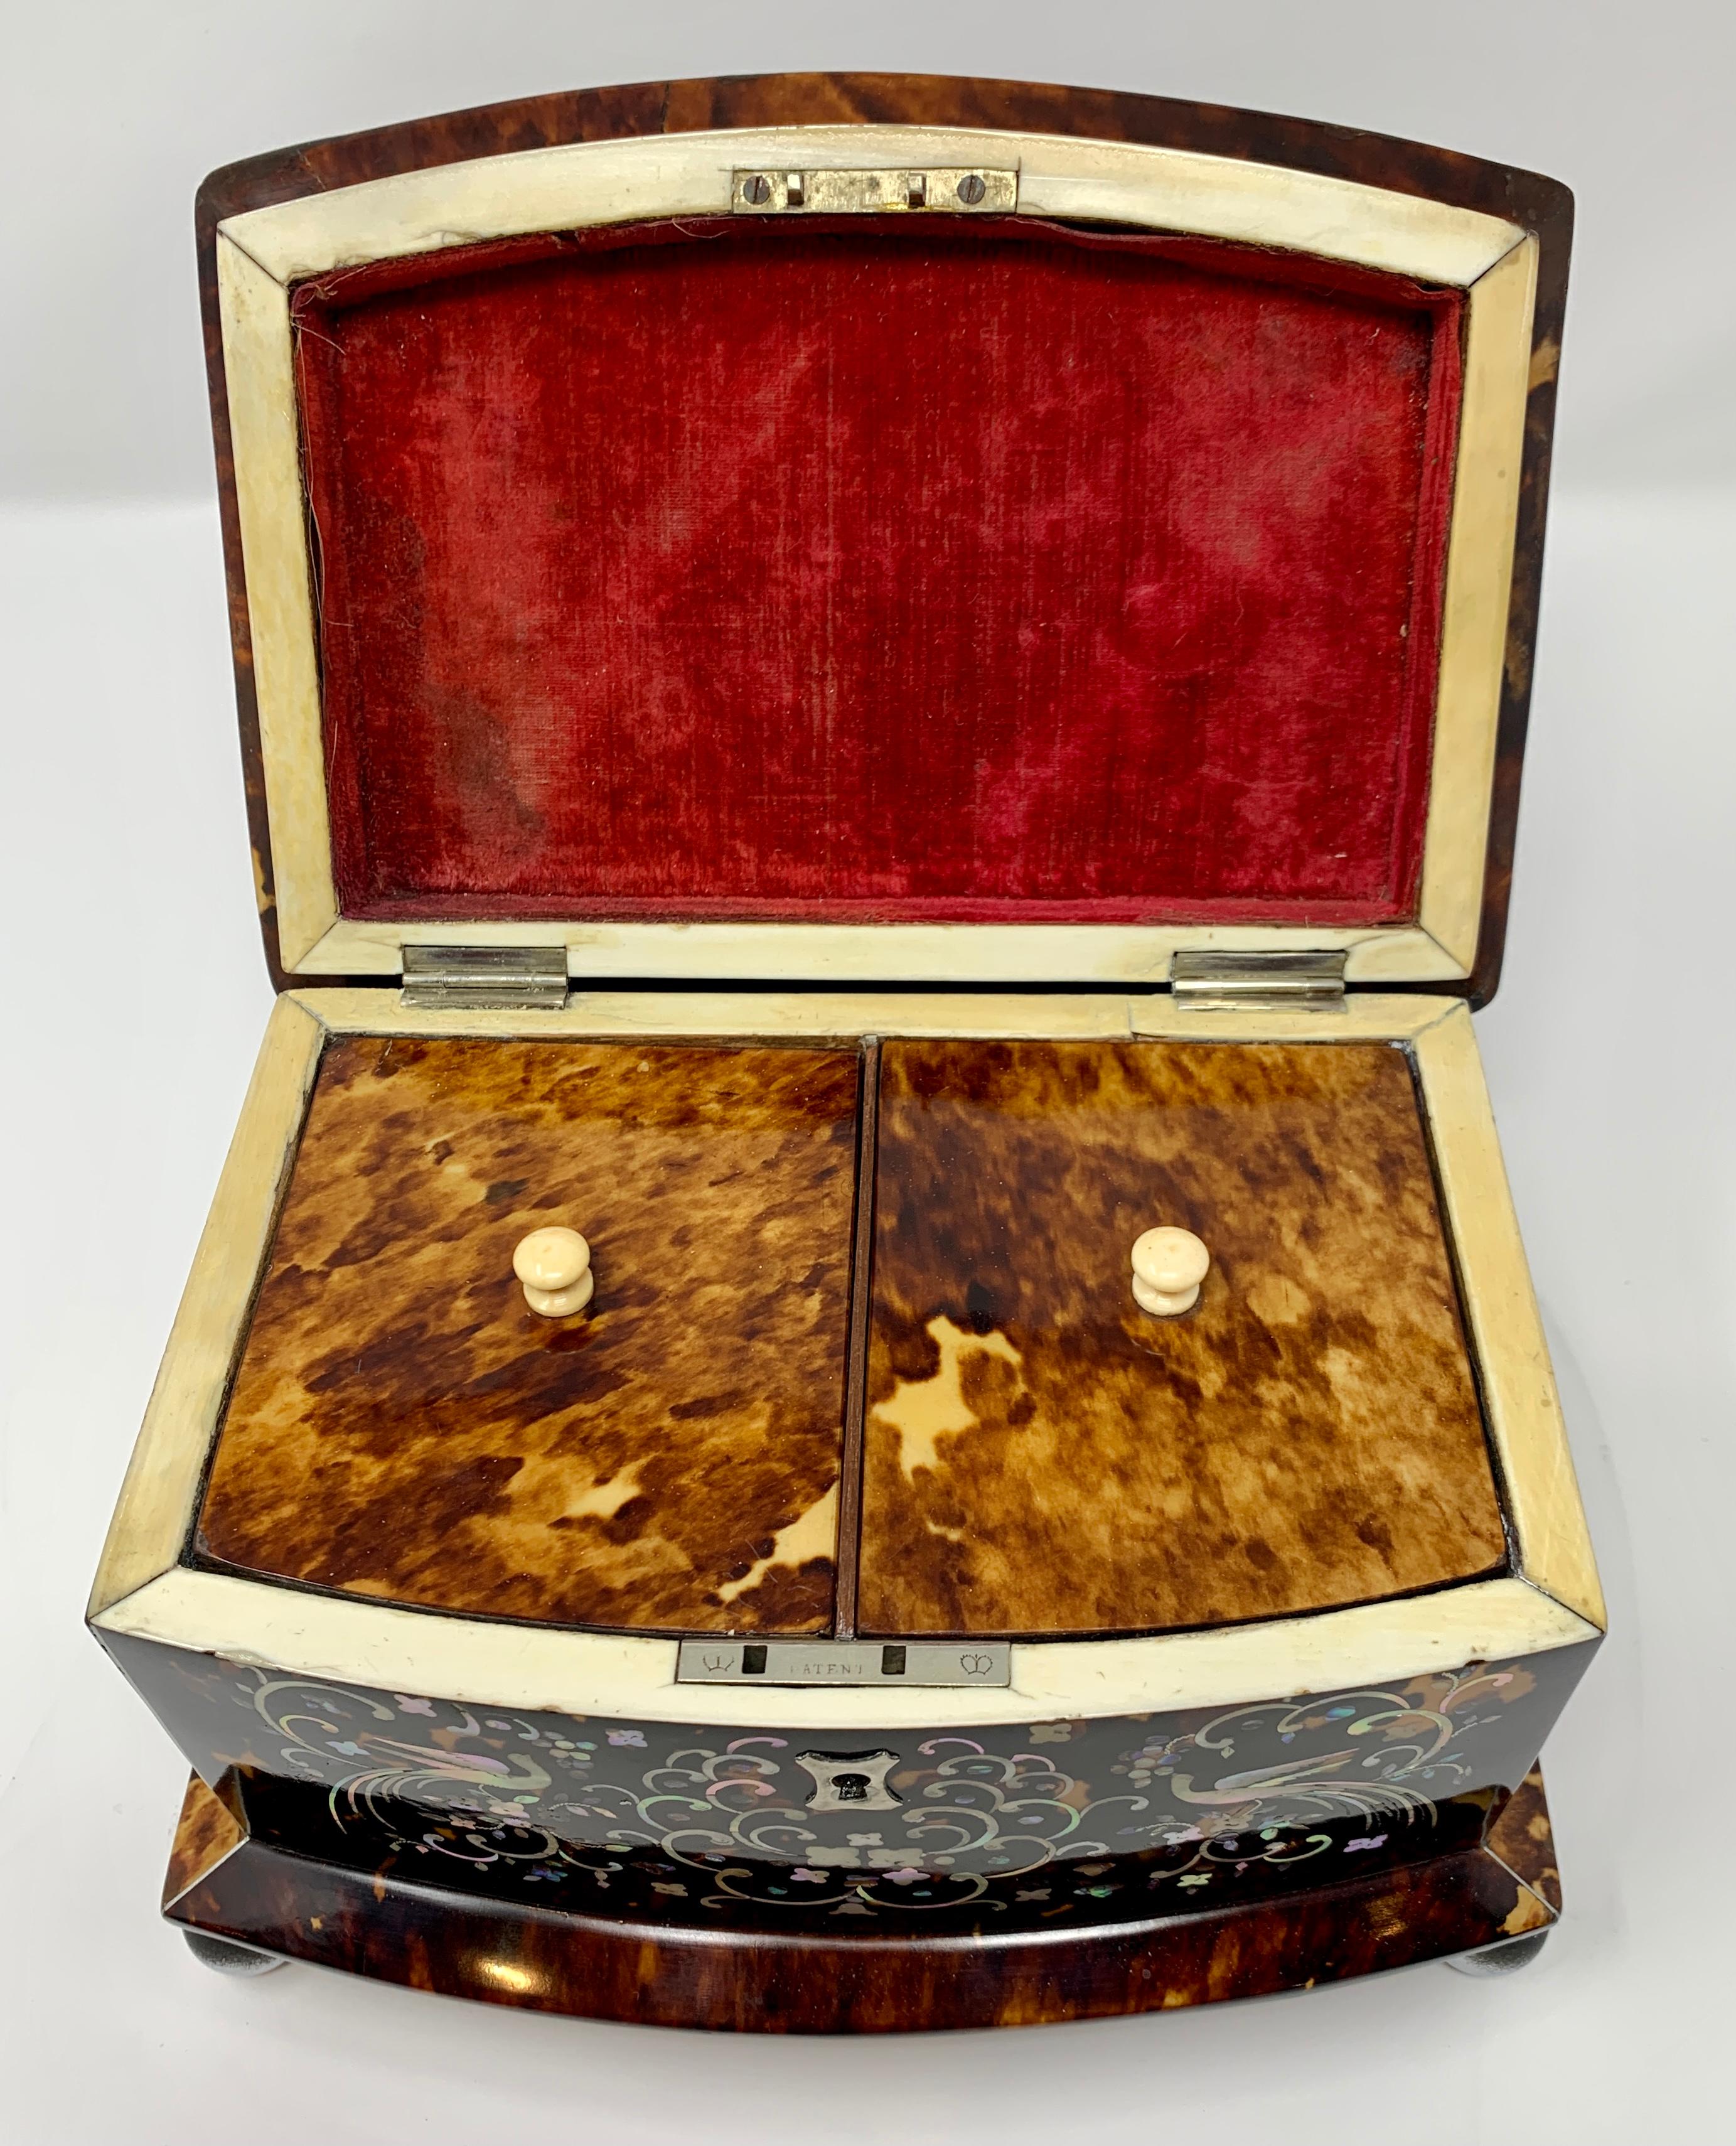 Antique English tortoise shell tea caddy with inlaid mother of pearl, Circa 1870-1880.